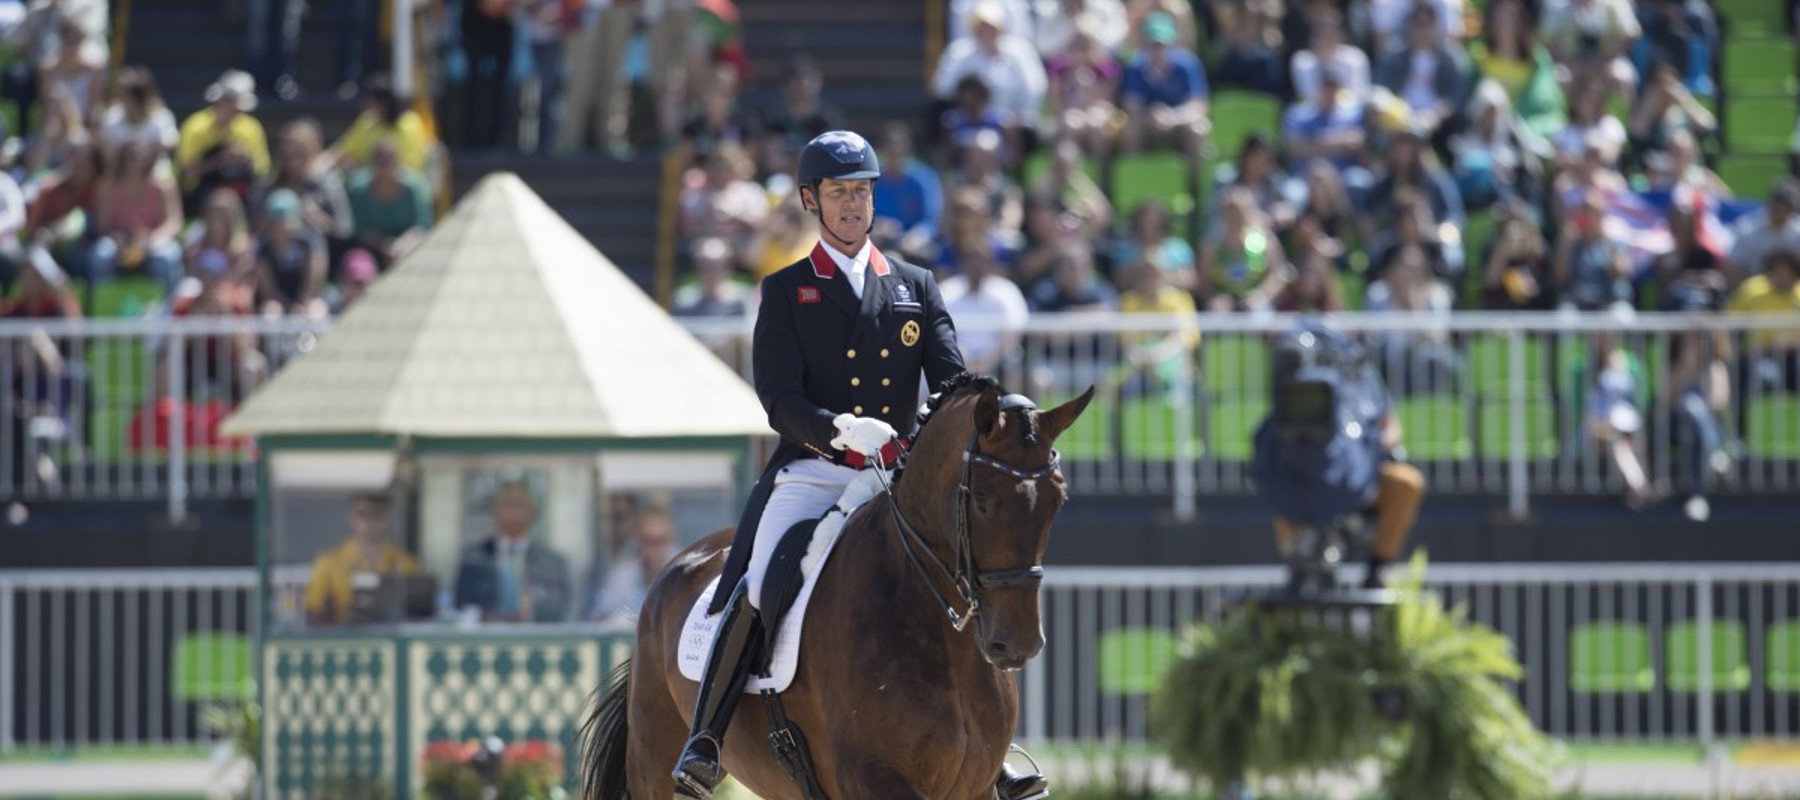 Groom With Riding Pathway (Dressage)